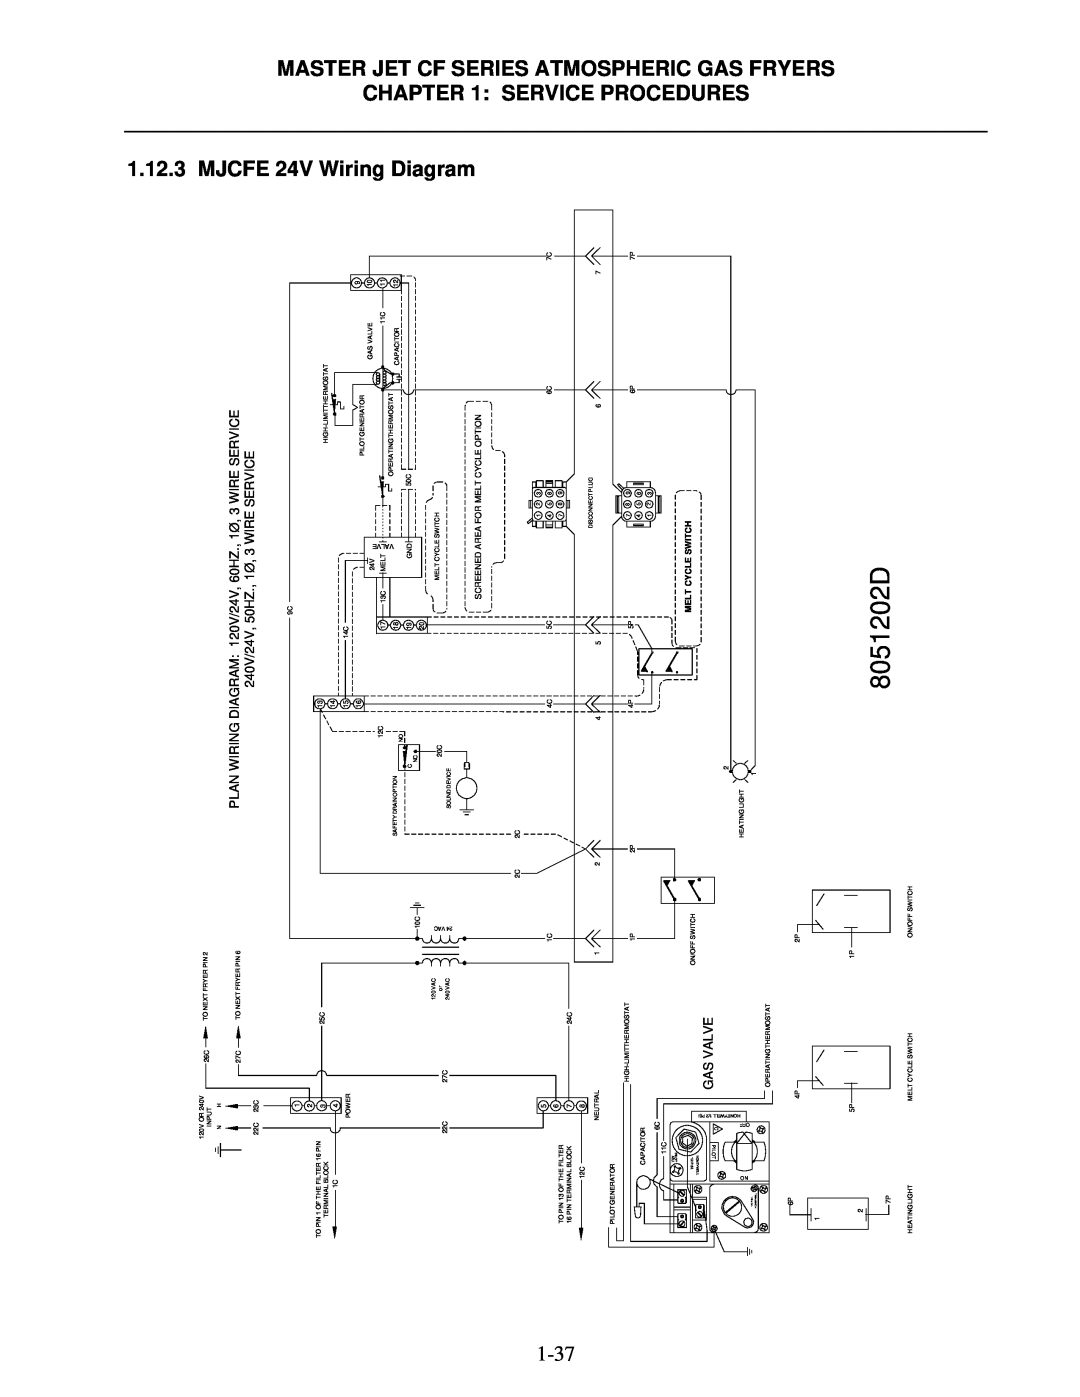 Frymaster J3F, MJCFEC Mjcfe, Wiring Diagram, 8051202D, Gas Valve, Screened Area For Melt Cycle Option, Melt Cycle Switch 